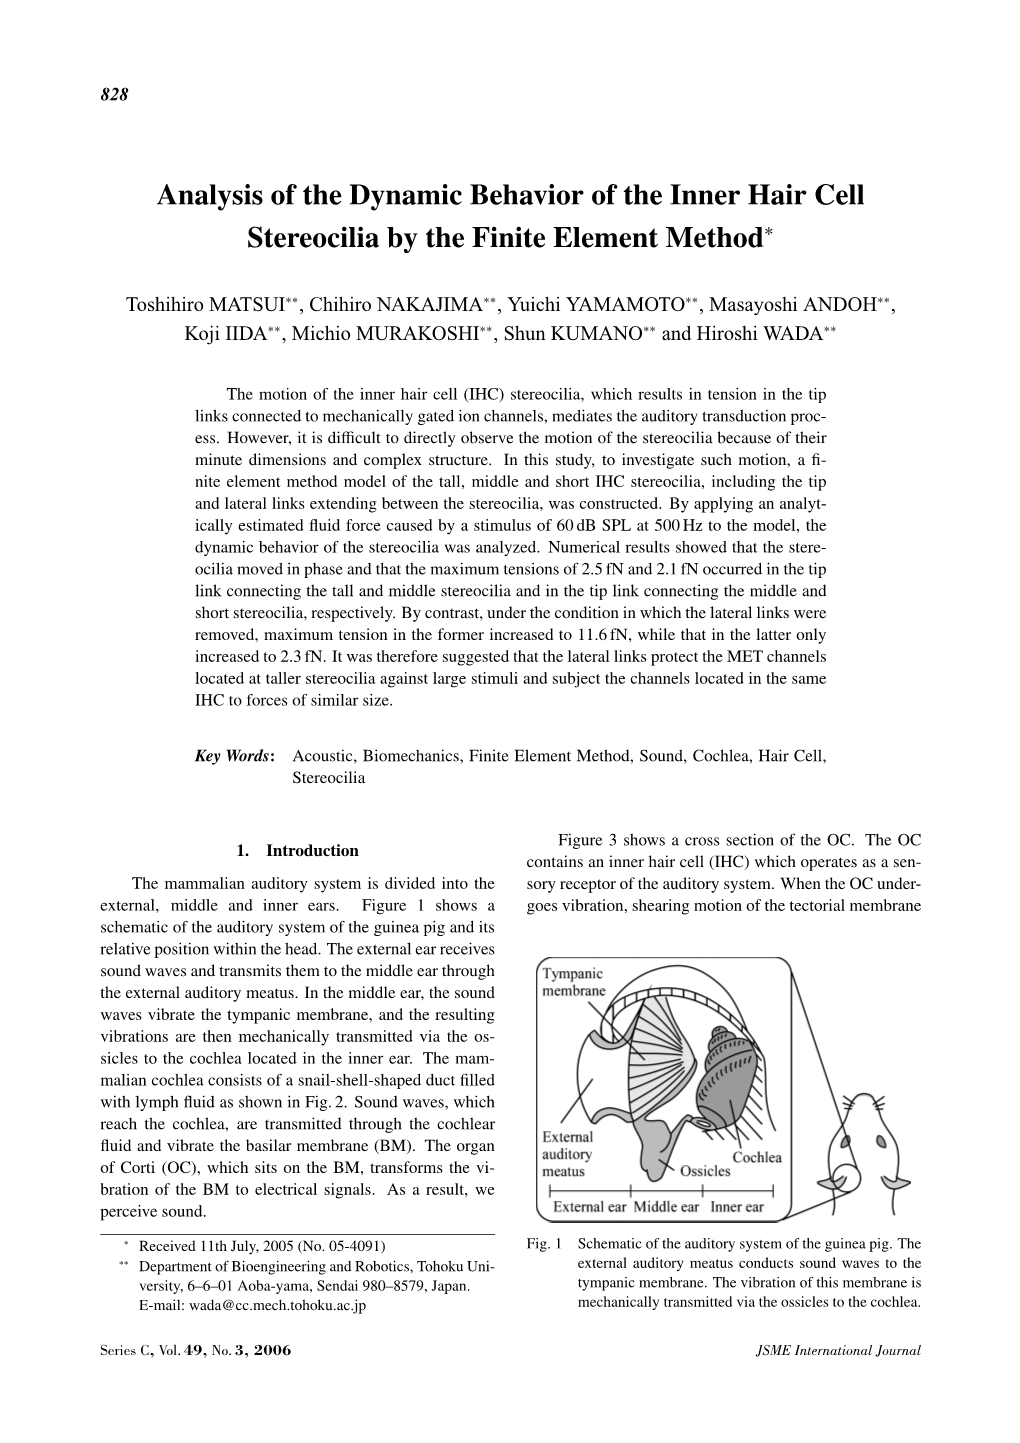 Analysis of the Dynamic Behavior of the Inner Hair Cell Stereocilia by the Finite Element Method∗